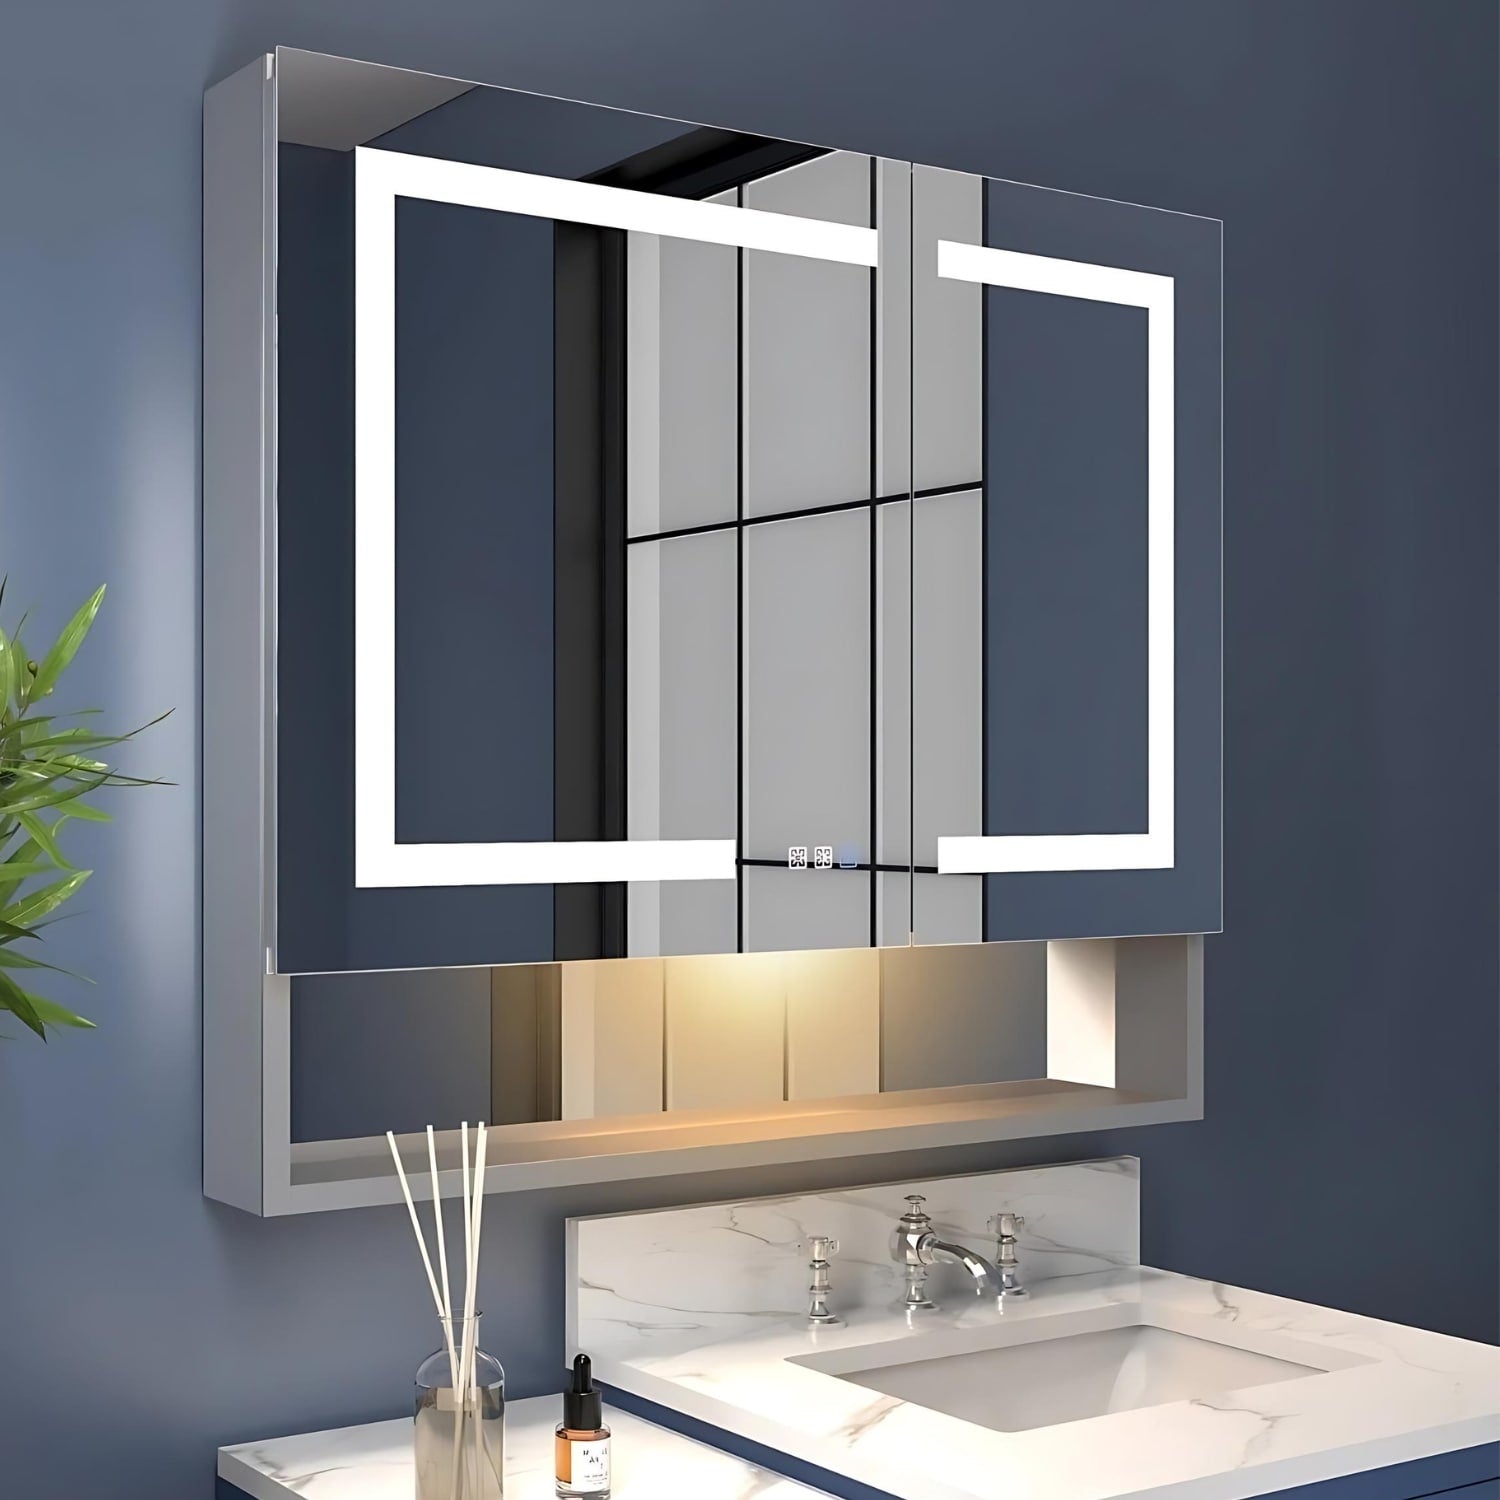 High-Tech Lighted Medicine Cabinet ready to light up your next bathroom makeover